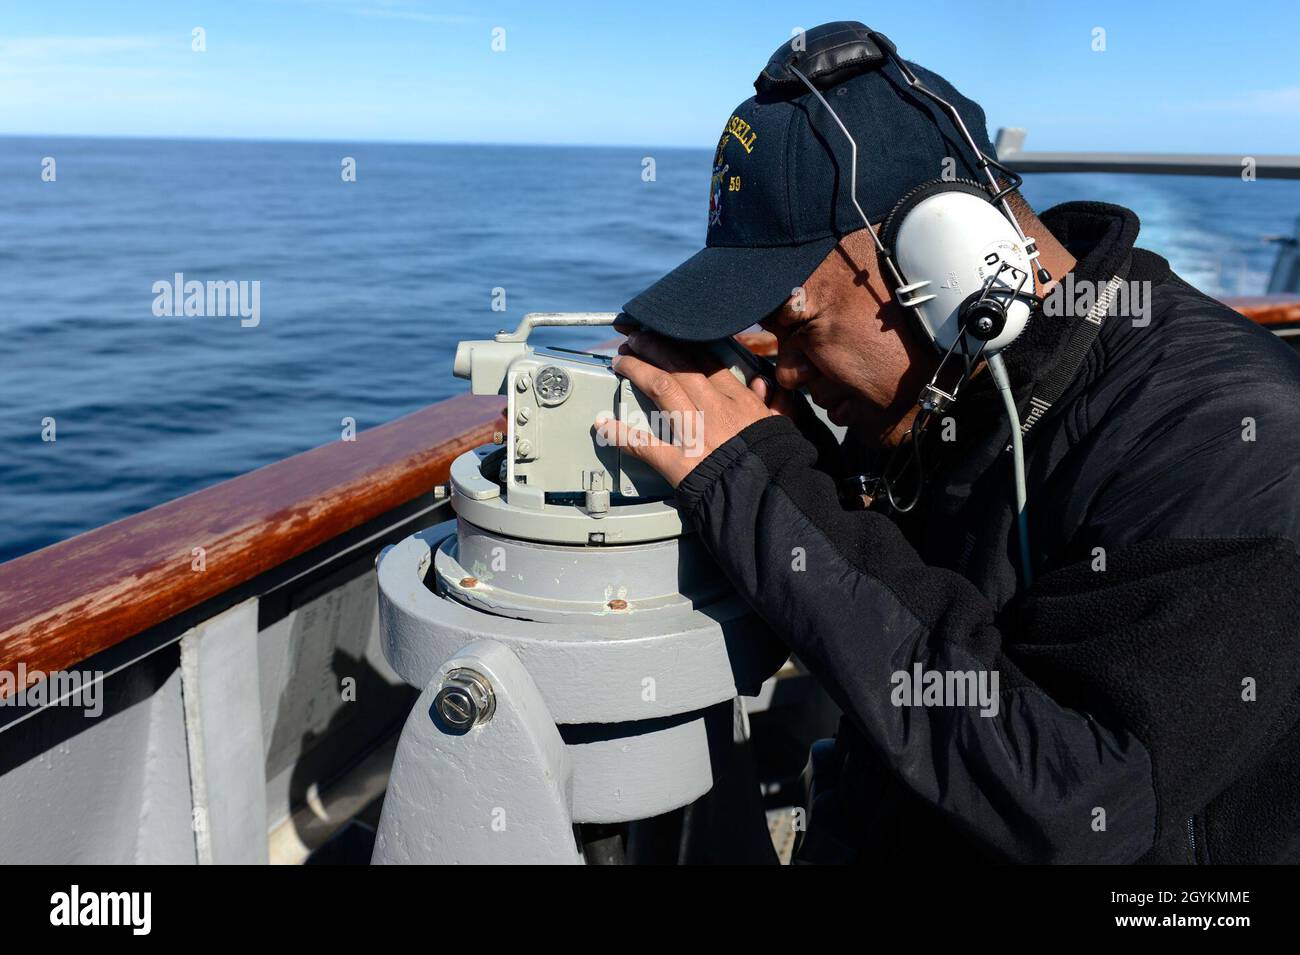 PACIFIC OCEAN (Jan. 21, 2020) Seaman Aaron Bactad, from San Francisco, looks through a telescopic alidade on the bridge wing of the Arleigh Burke-class guided-missile destroyer USS Russell (DDG 59) Jan. 21, 2020. Russell, part of the Theodore Roosevelt Carrier Strike Group, is on a scheduled deployment to the Indo-Pacific. (U.S. Navy photo by Mass Communication Specialist 3rd Class Sean Lynch) Stock Photo